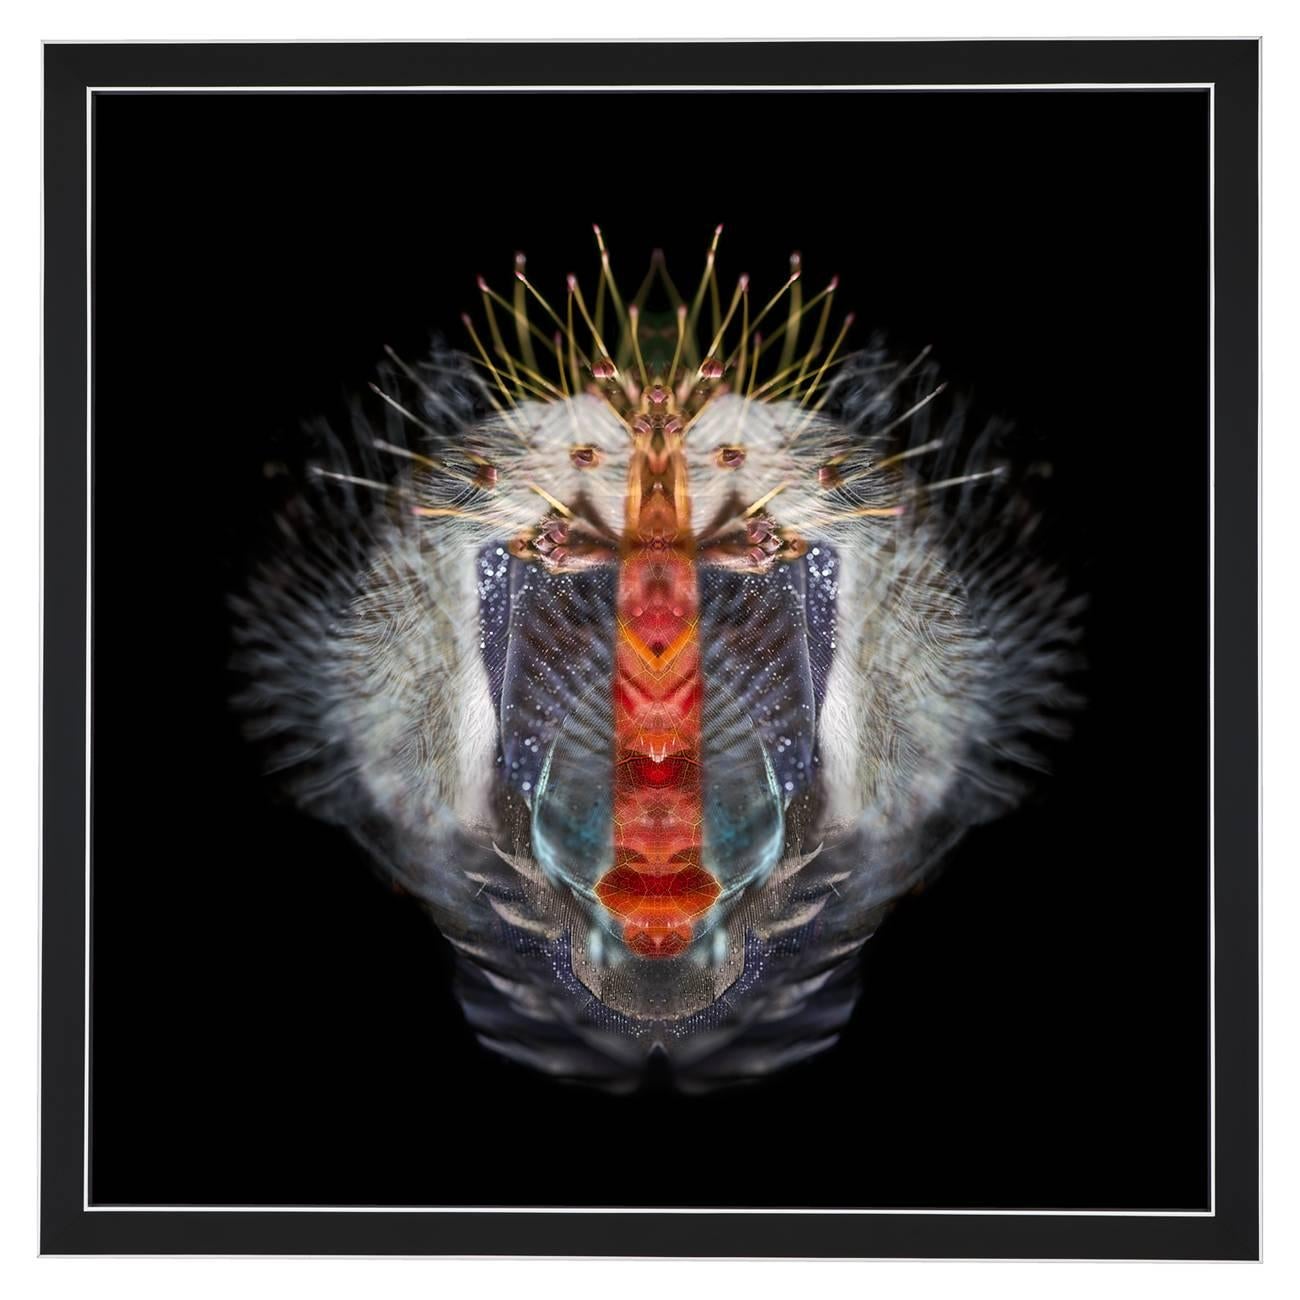 Composition: 
Hadeda Ibis feathers, Hawthorn leaf, Pin cushion protea, Dew drops, Water patterns

Limited edition. Each image is uniquely printed directly to 5mm acrylic glass using UV cured pigment inks giving each photograph real depth and